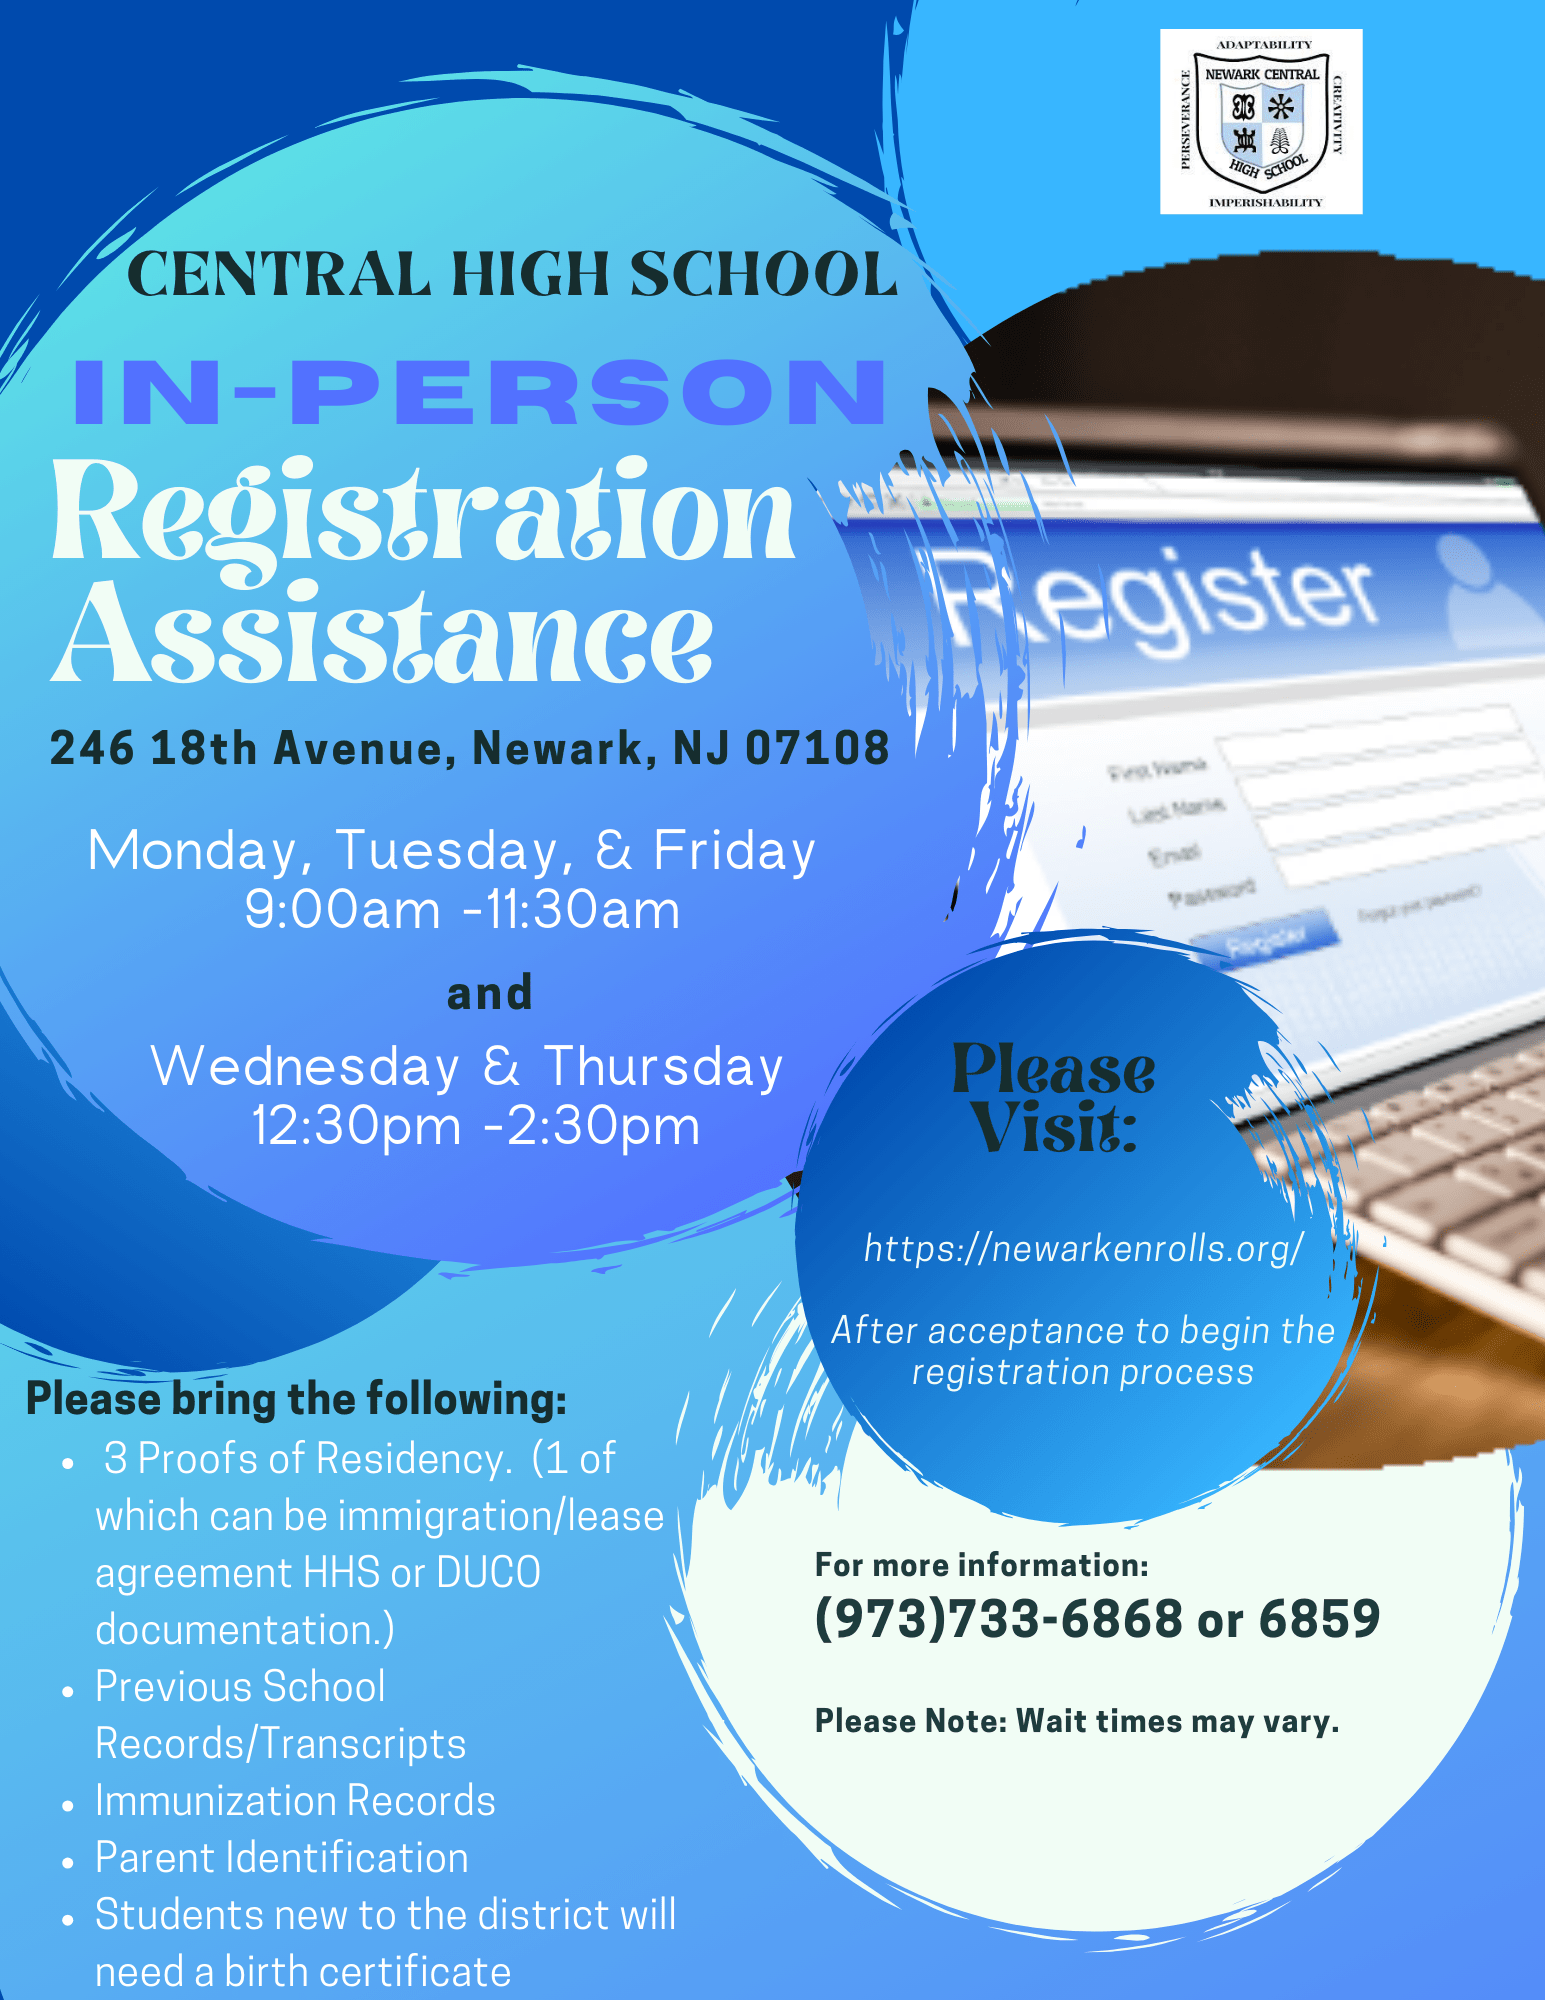 Central High School In-Person Registration Assistance - Hours and Information